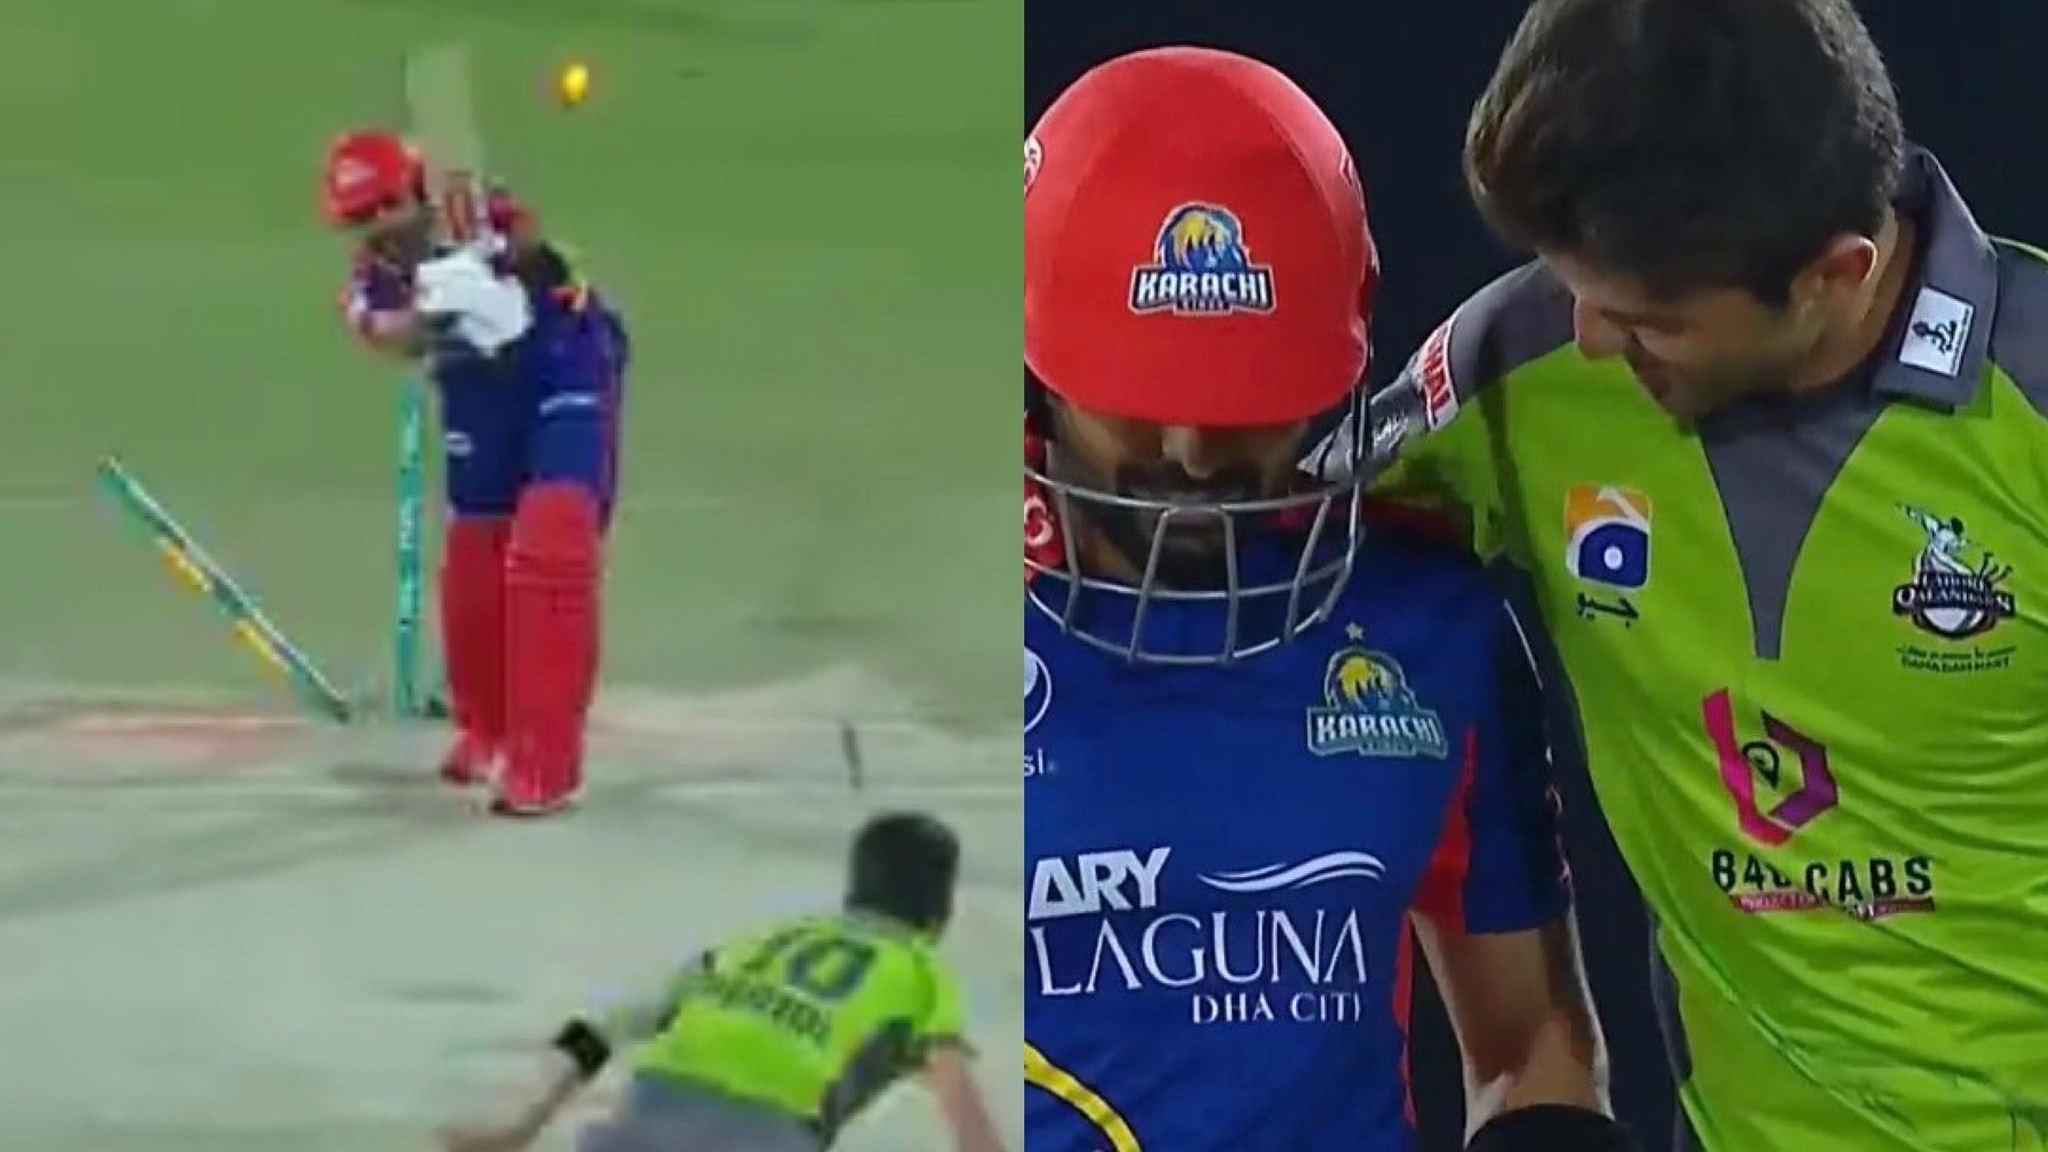 PSL 2021: WATCH- Shaheen Afridi consoles Babar Azam after cleaning him up with a jaffa